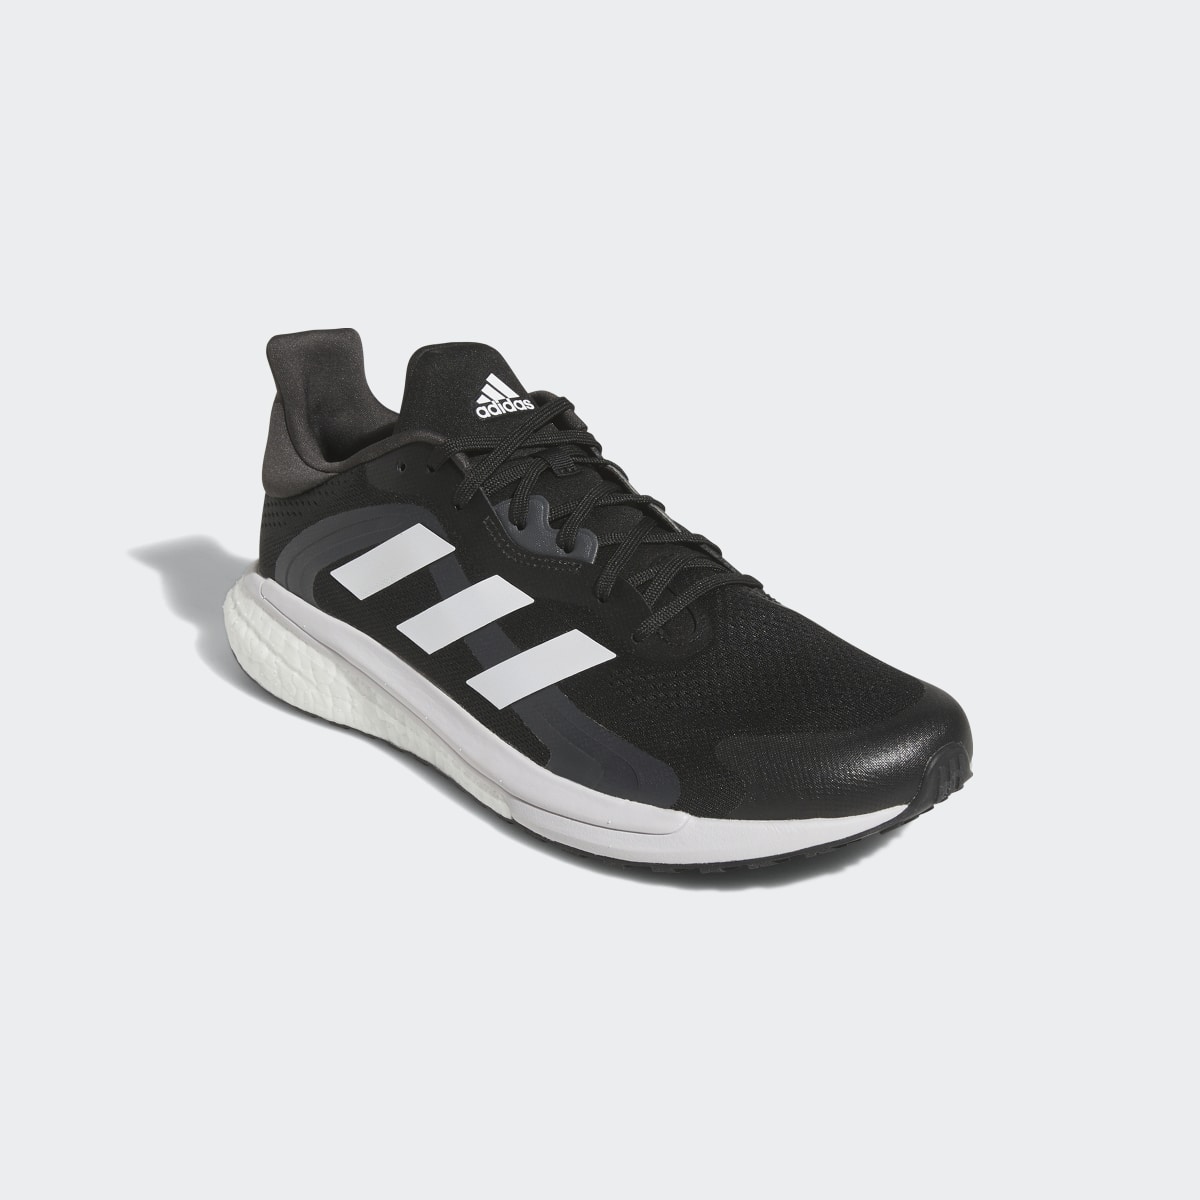 Adidas Sapatilhas SolarGlide 4 ST. 9